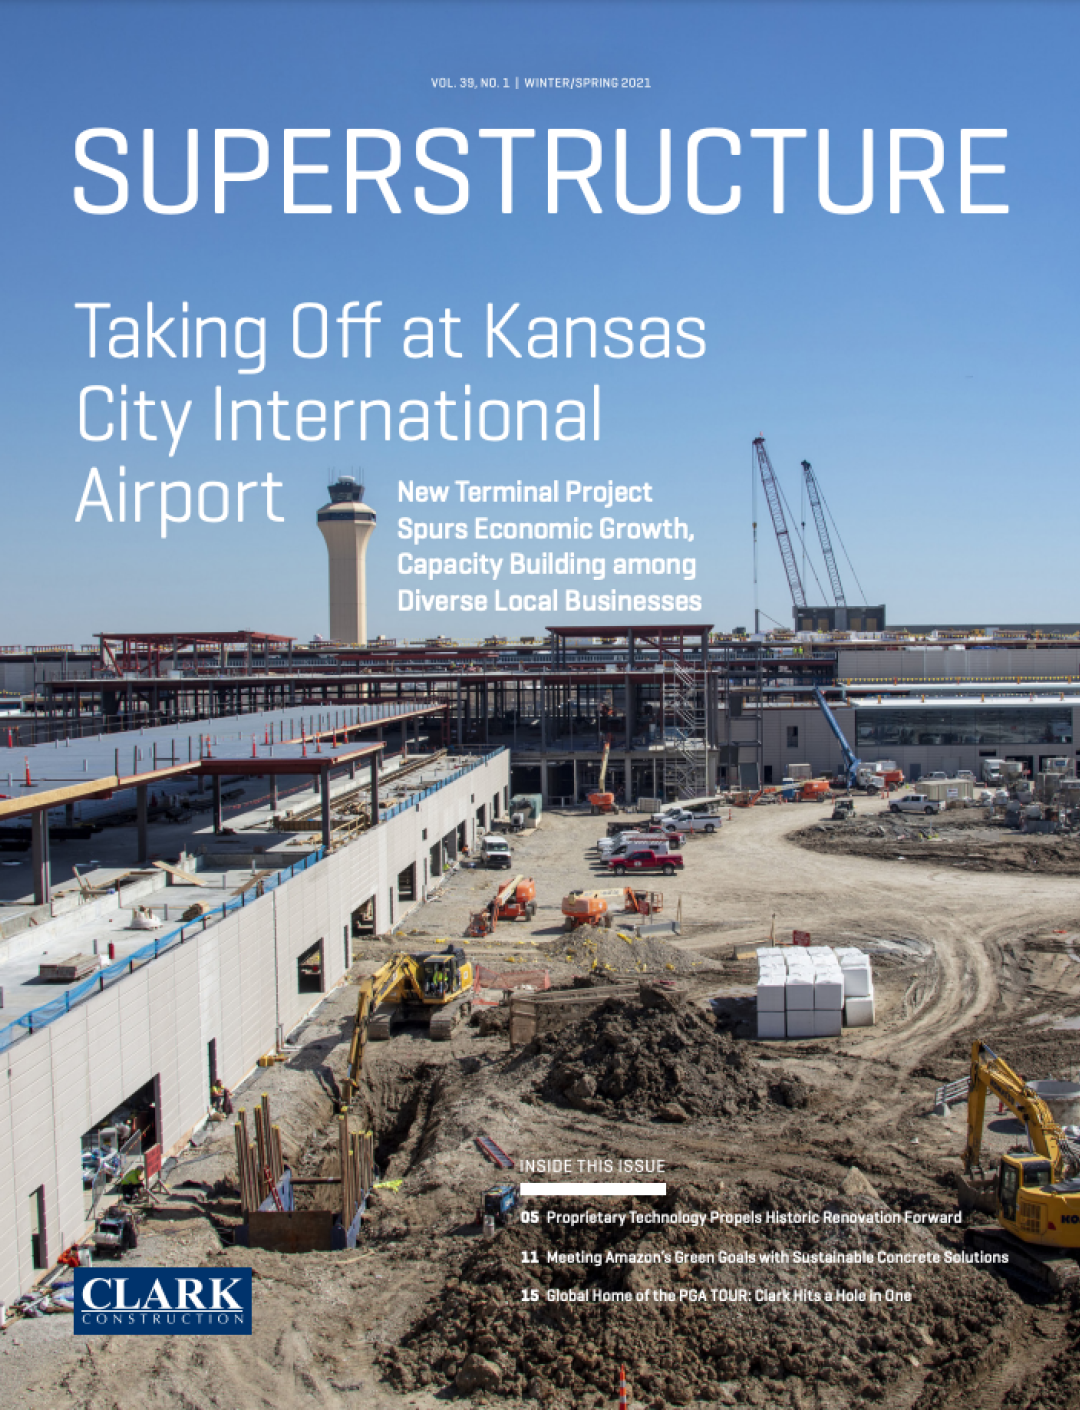 superstructure Winter 2020 / Spring 2021